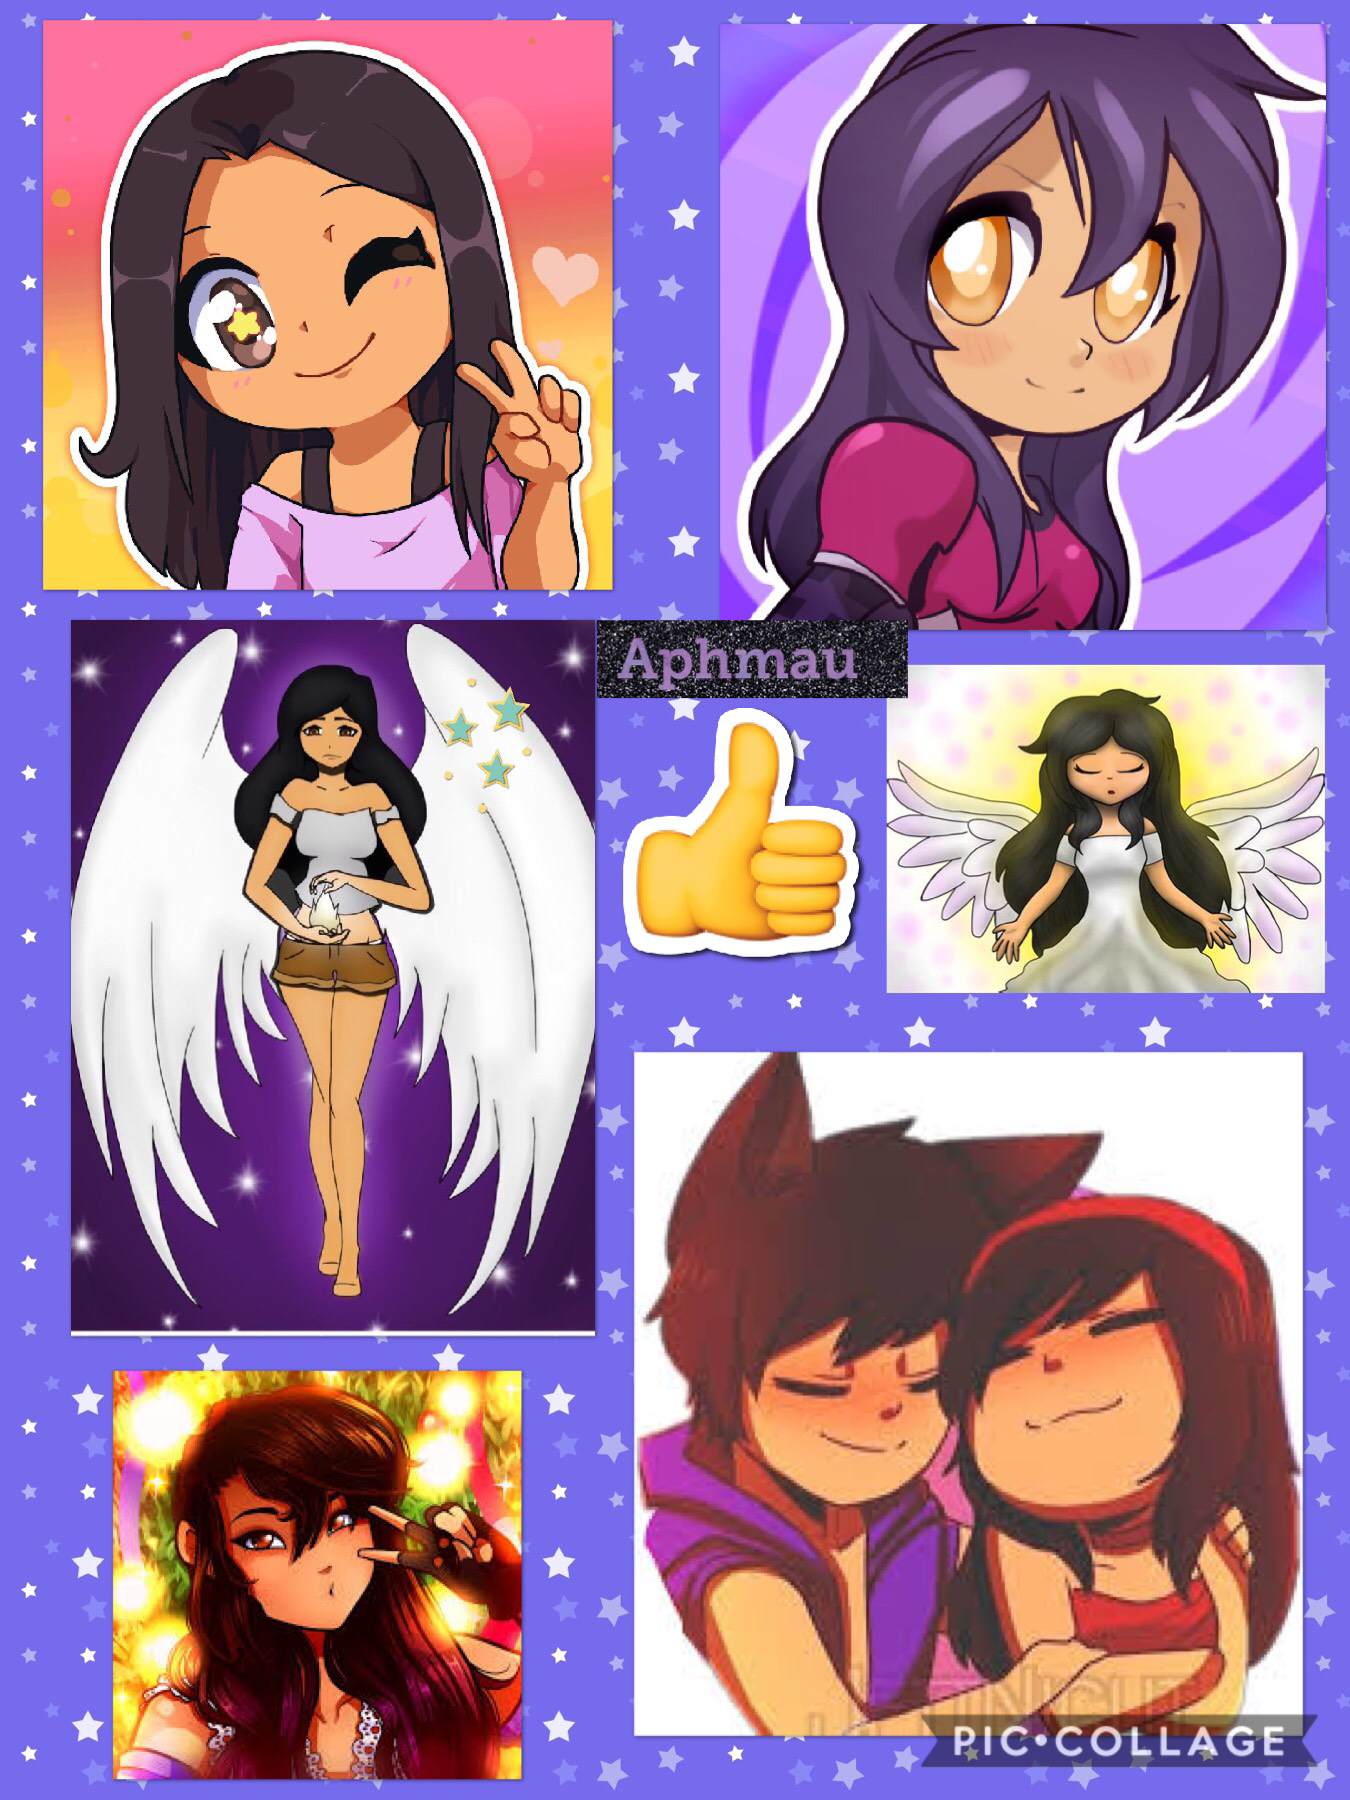 Like or comment if Aphmau is your favorite youtuber